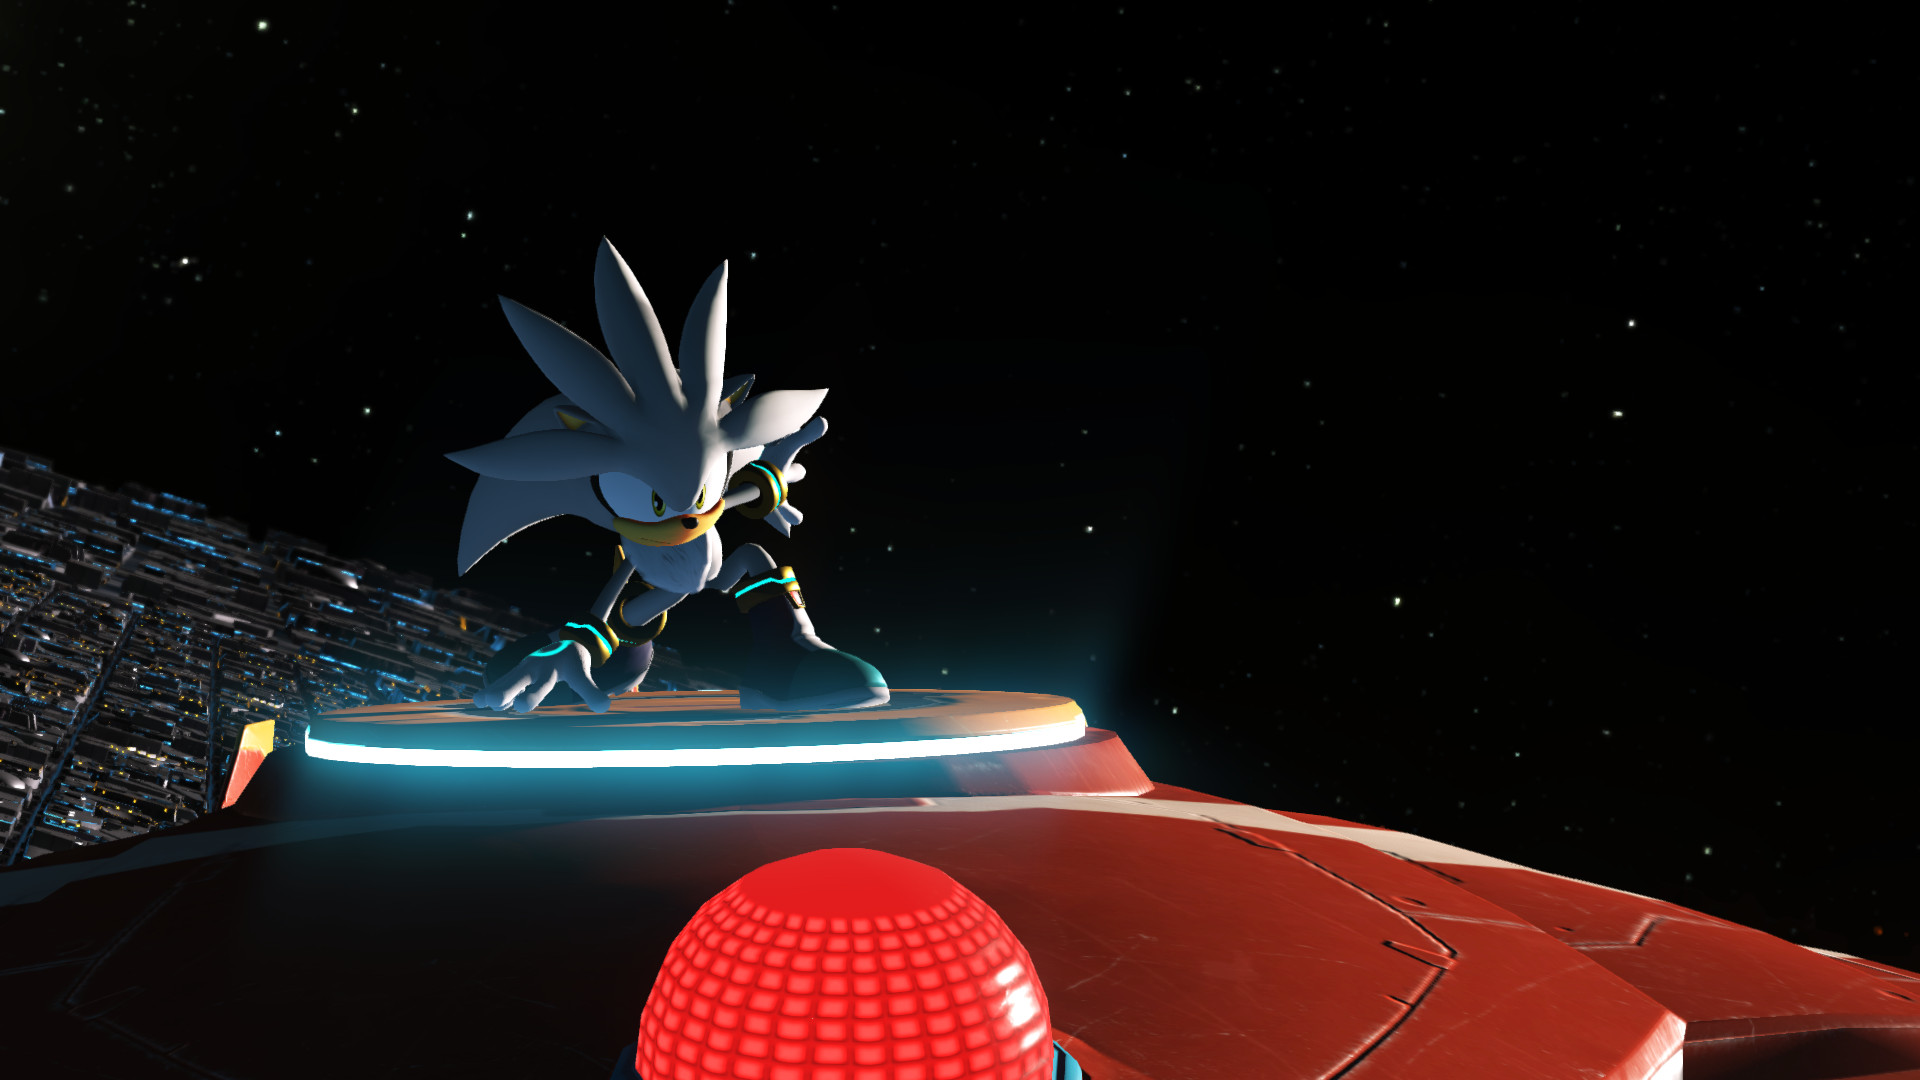 Silver The Hedgehog Character Mod - Darkness - HD Wallpaper 